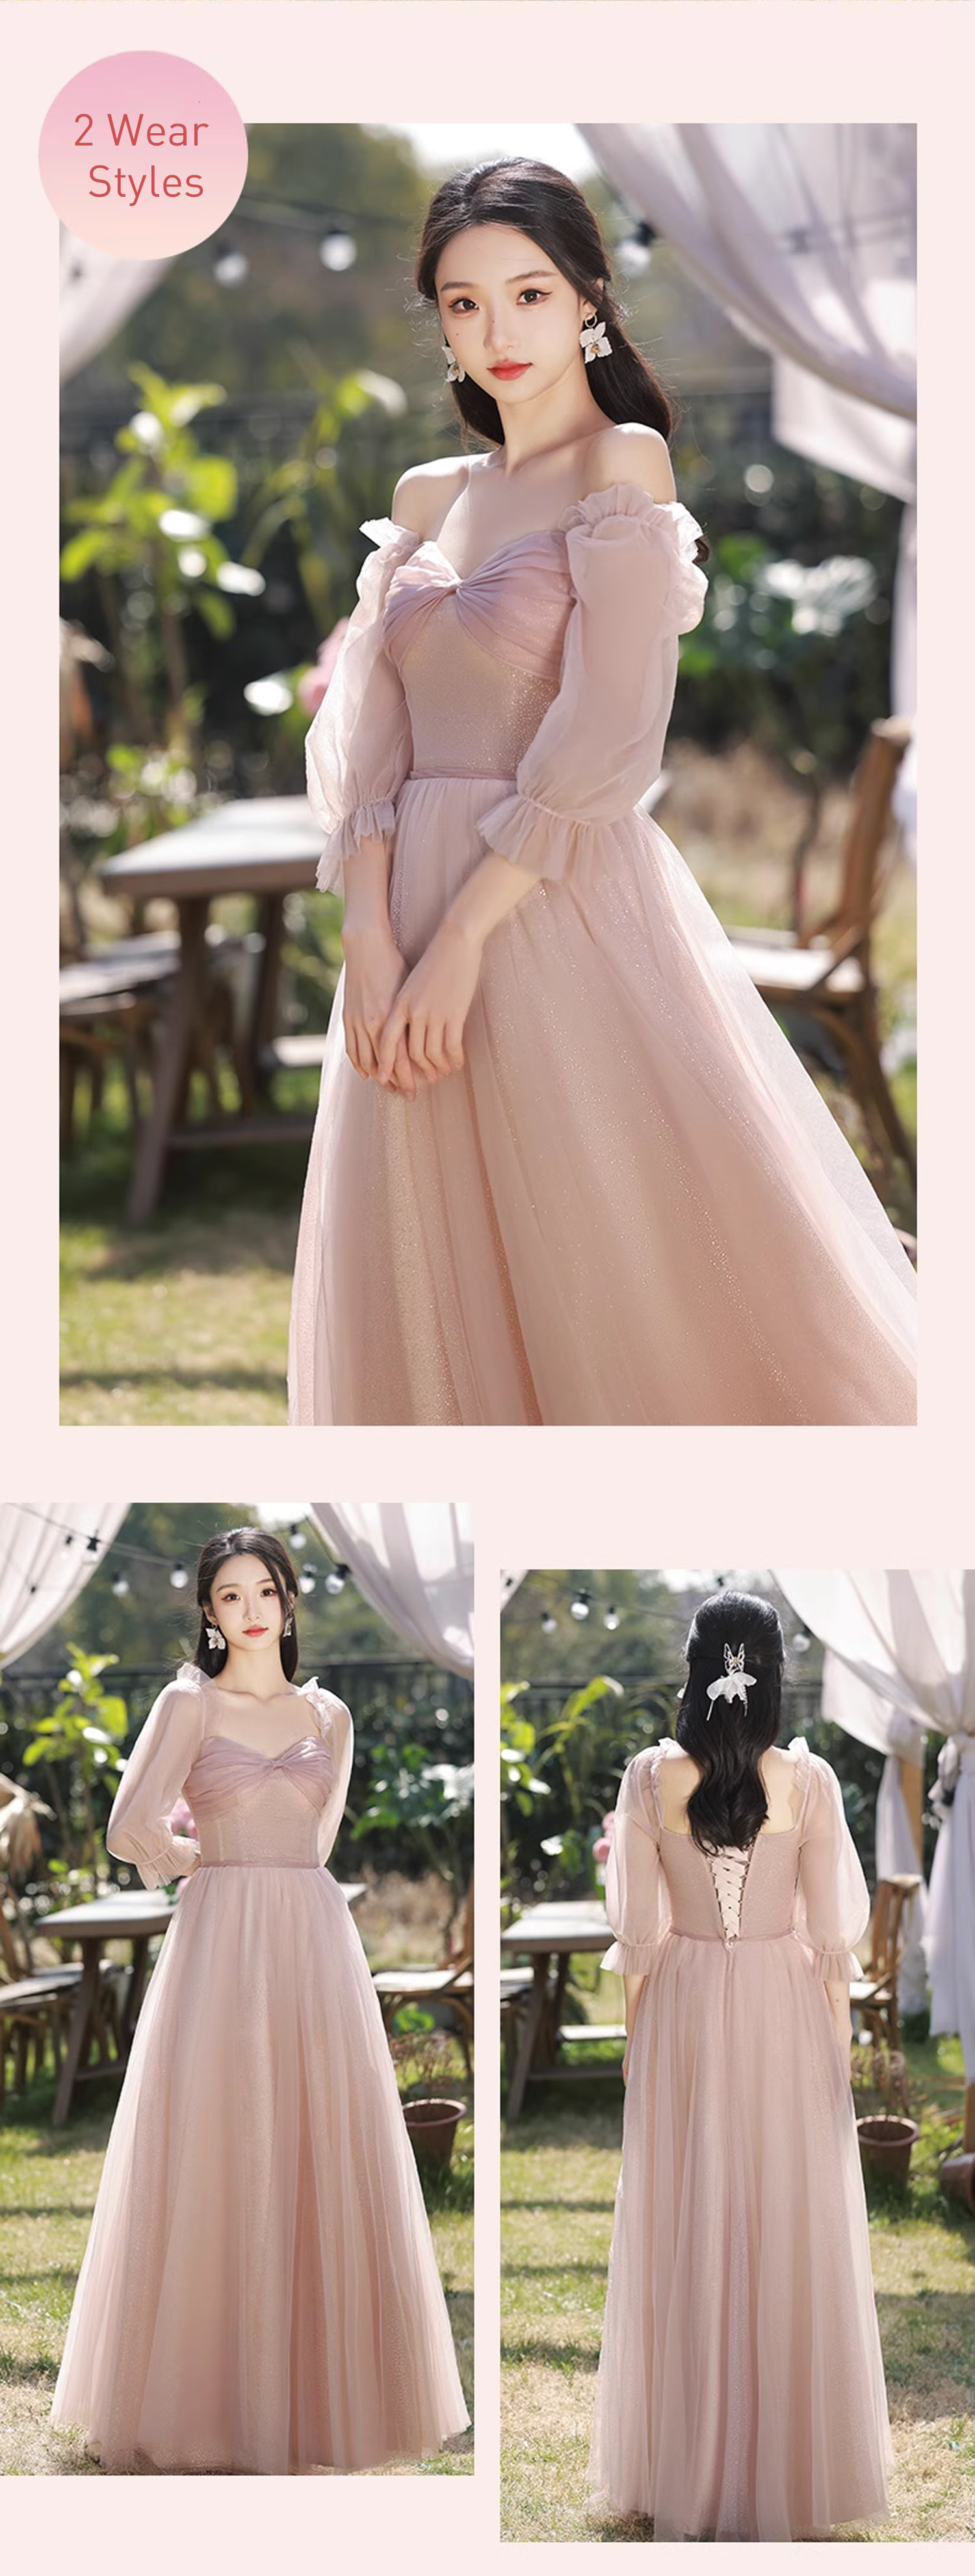 Elegant-Pink-Tulle-Slim-Fit-Bridesmaid-Wedding-Guest-Party-Maxi-Dress24